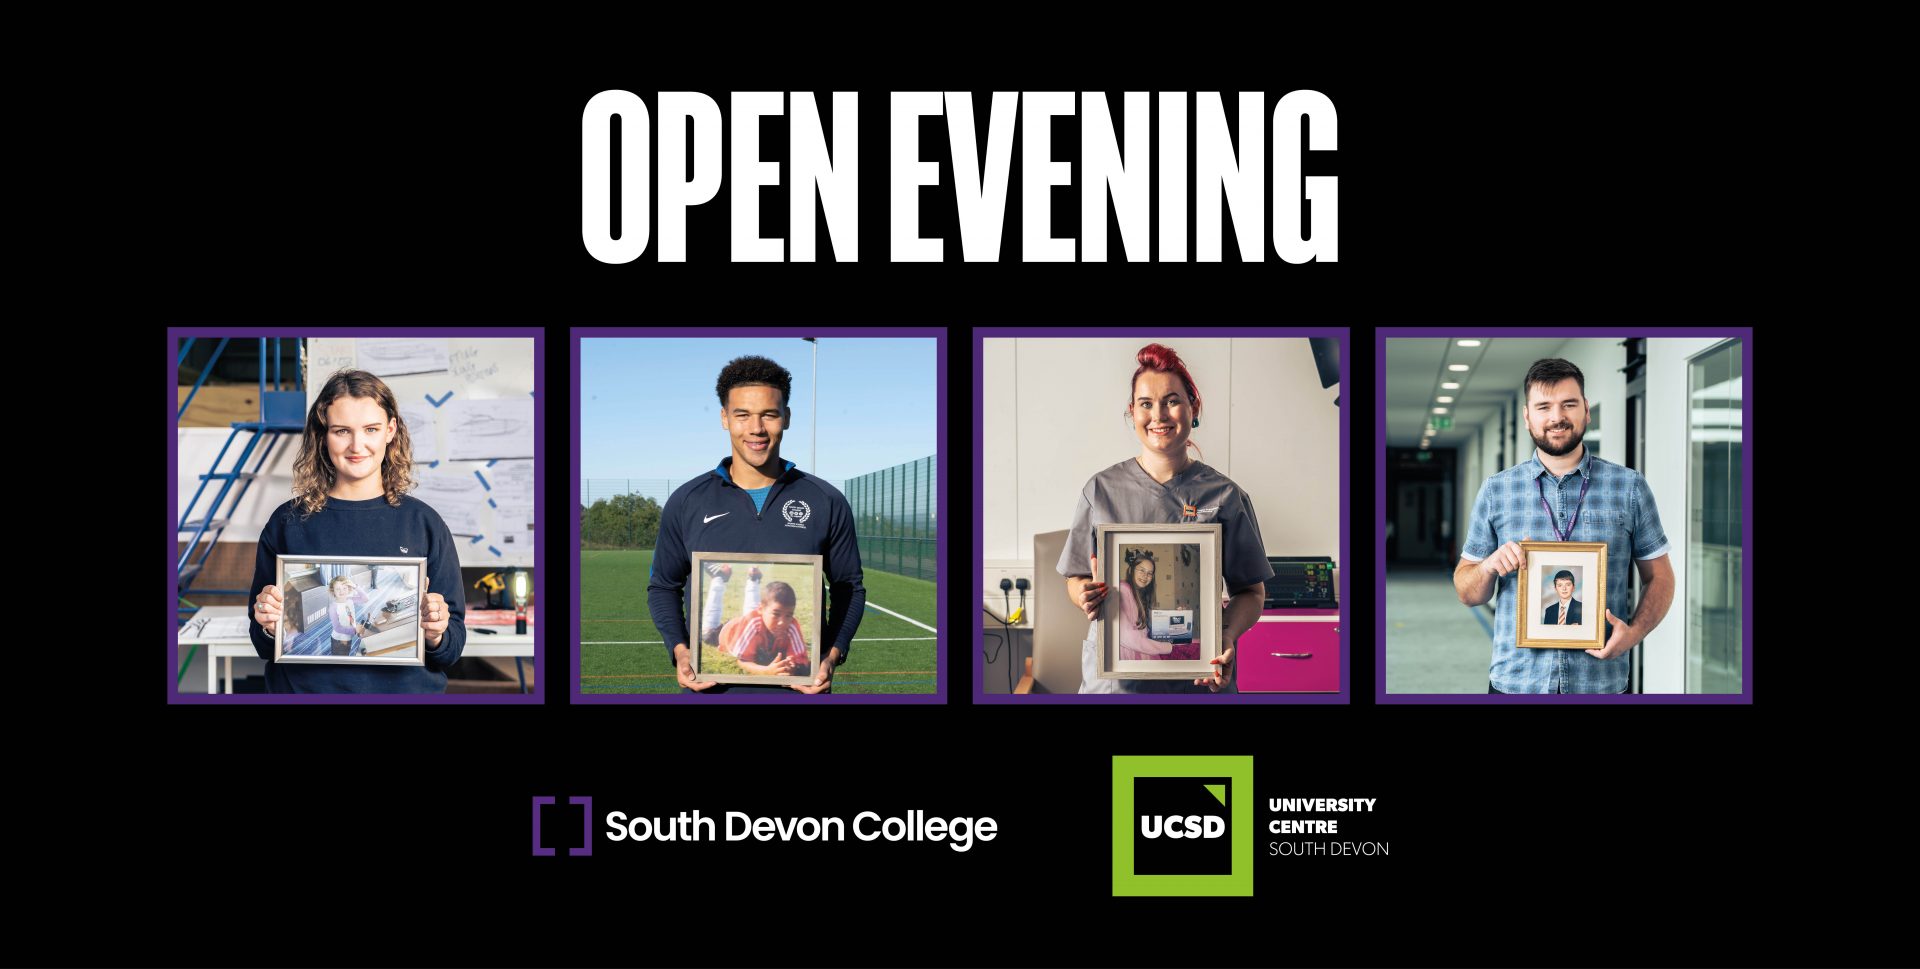 Open Event graphic with 4 images of students and staff